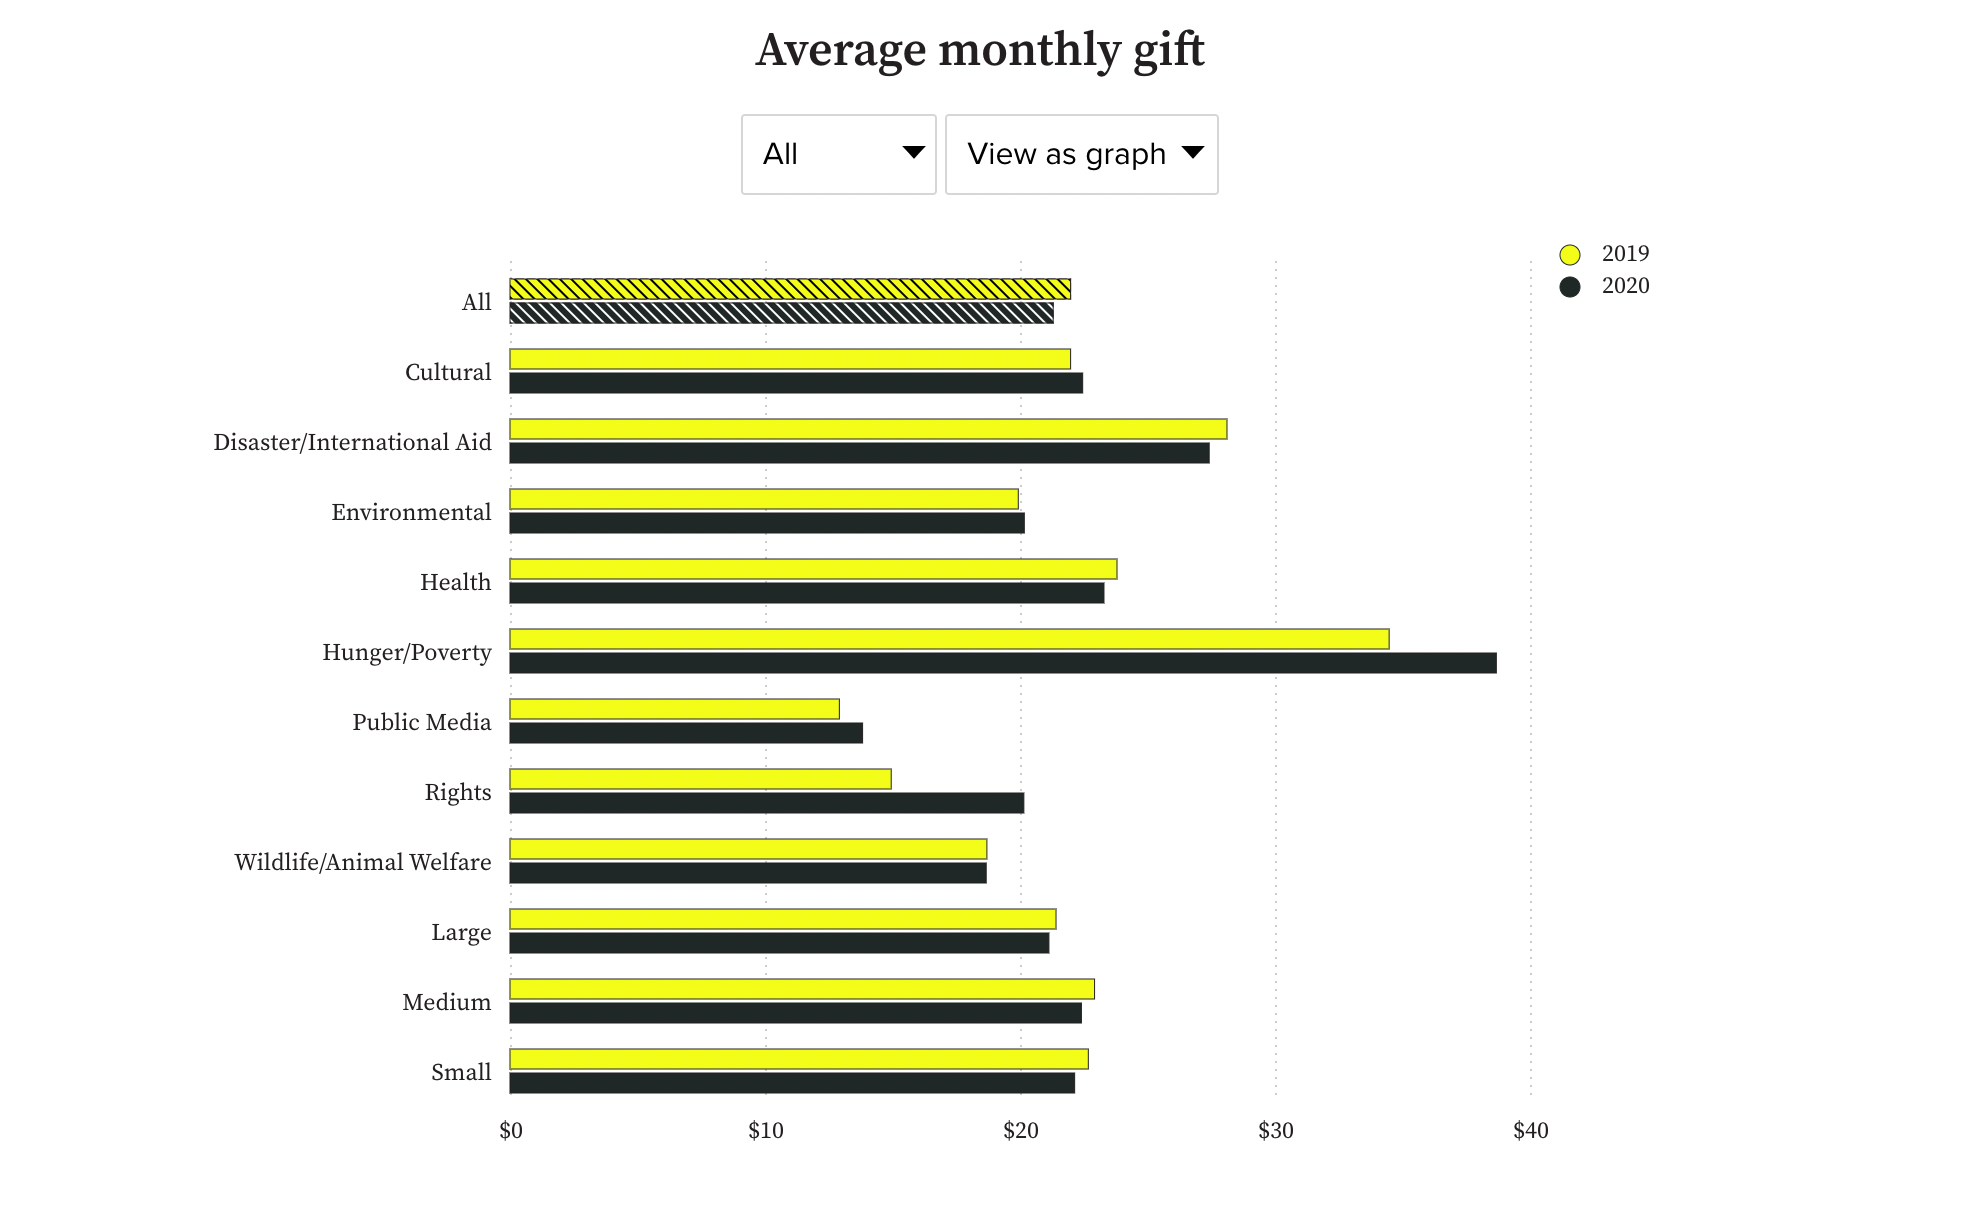 Average monthly giving per cause in non-profit sector according to M+R.